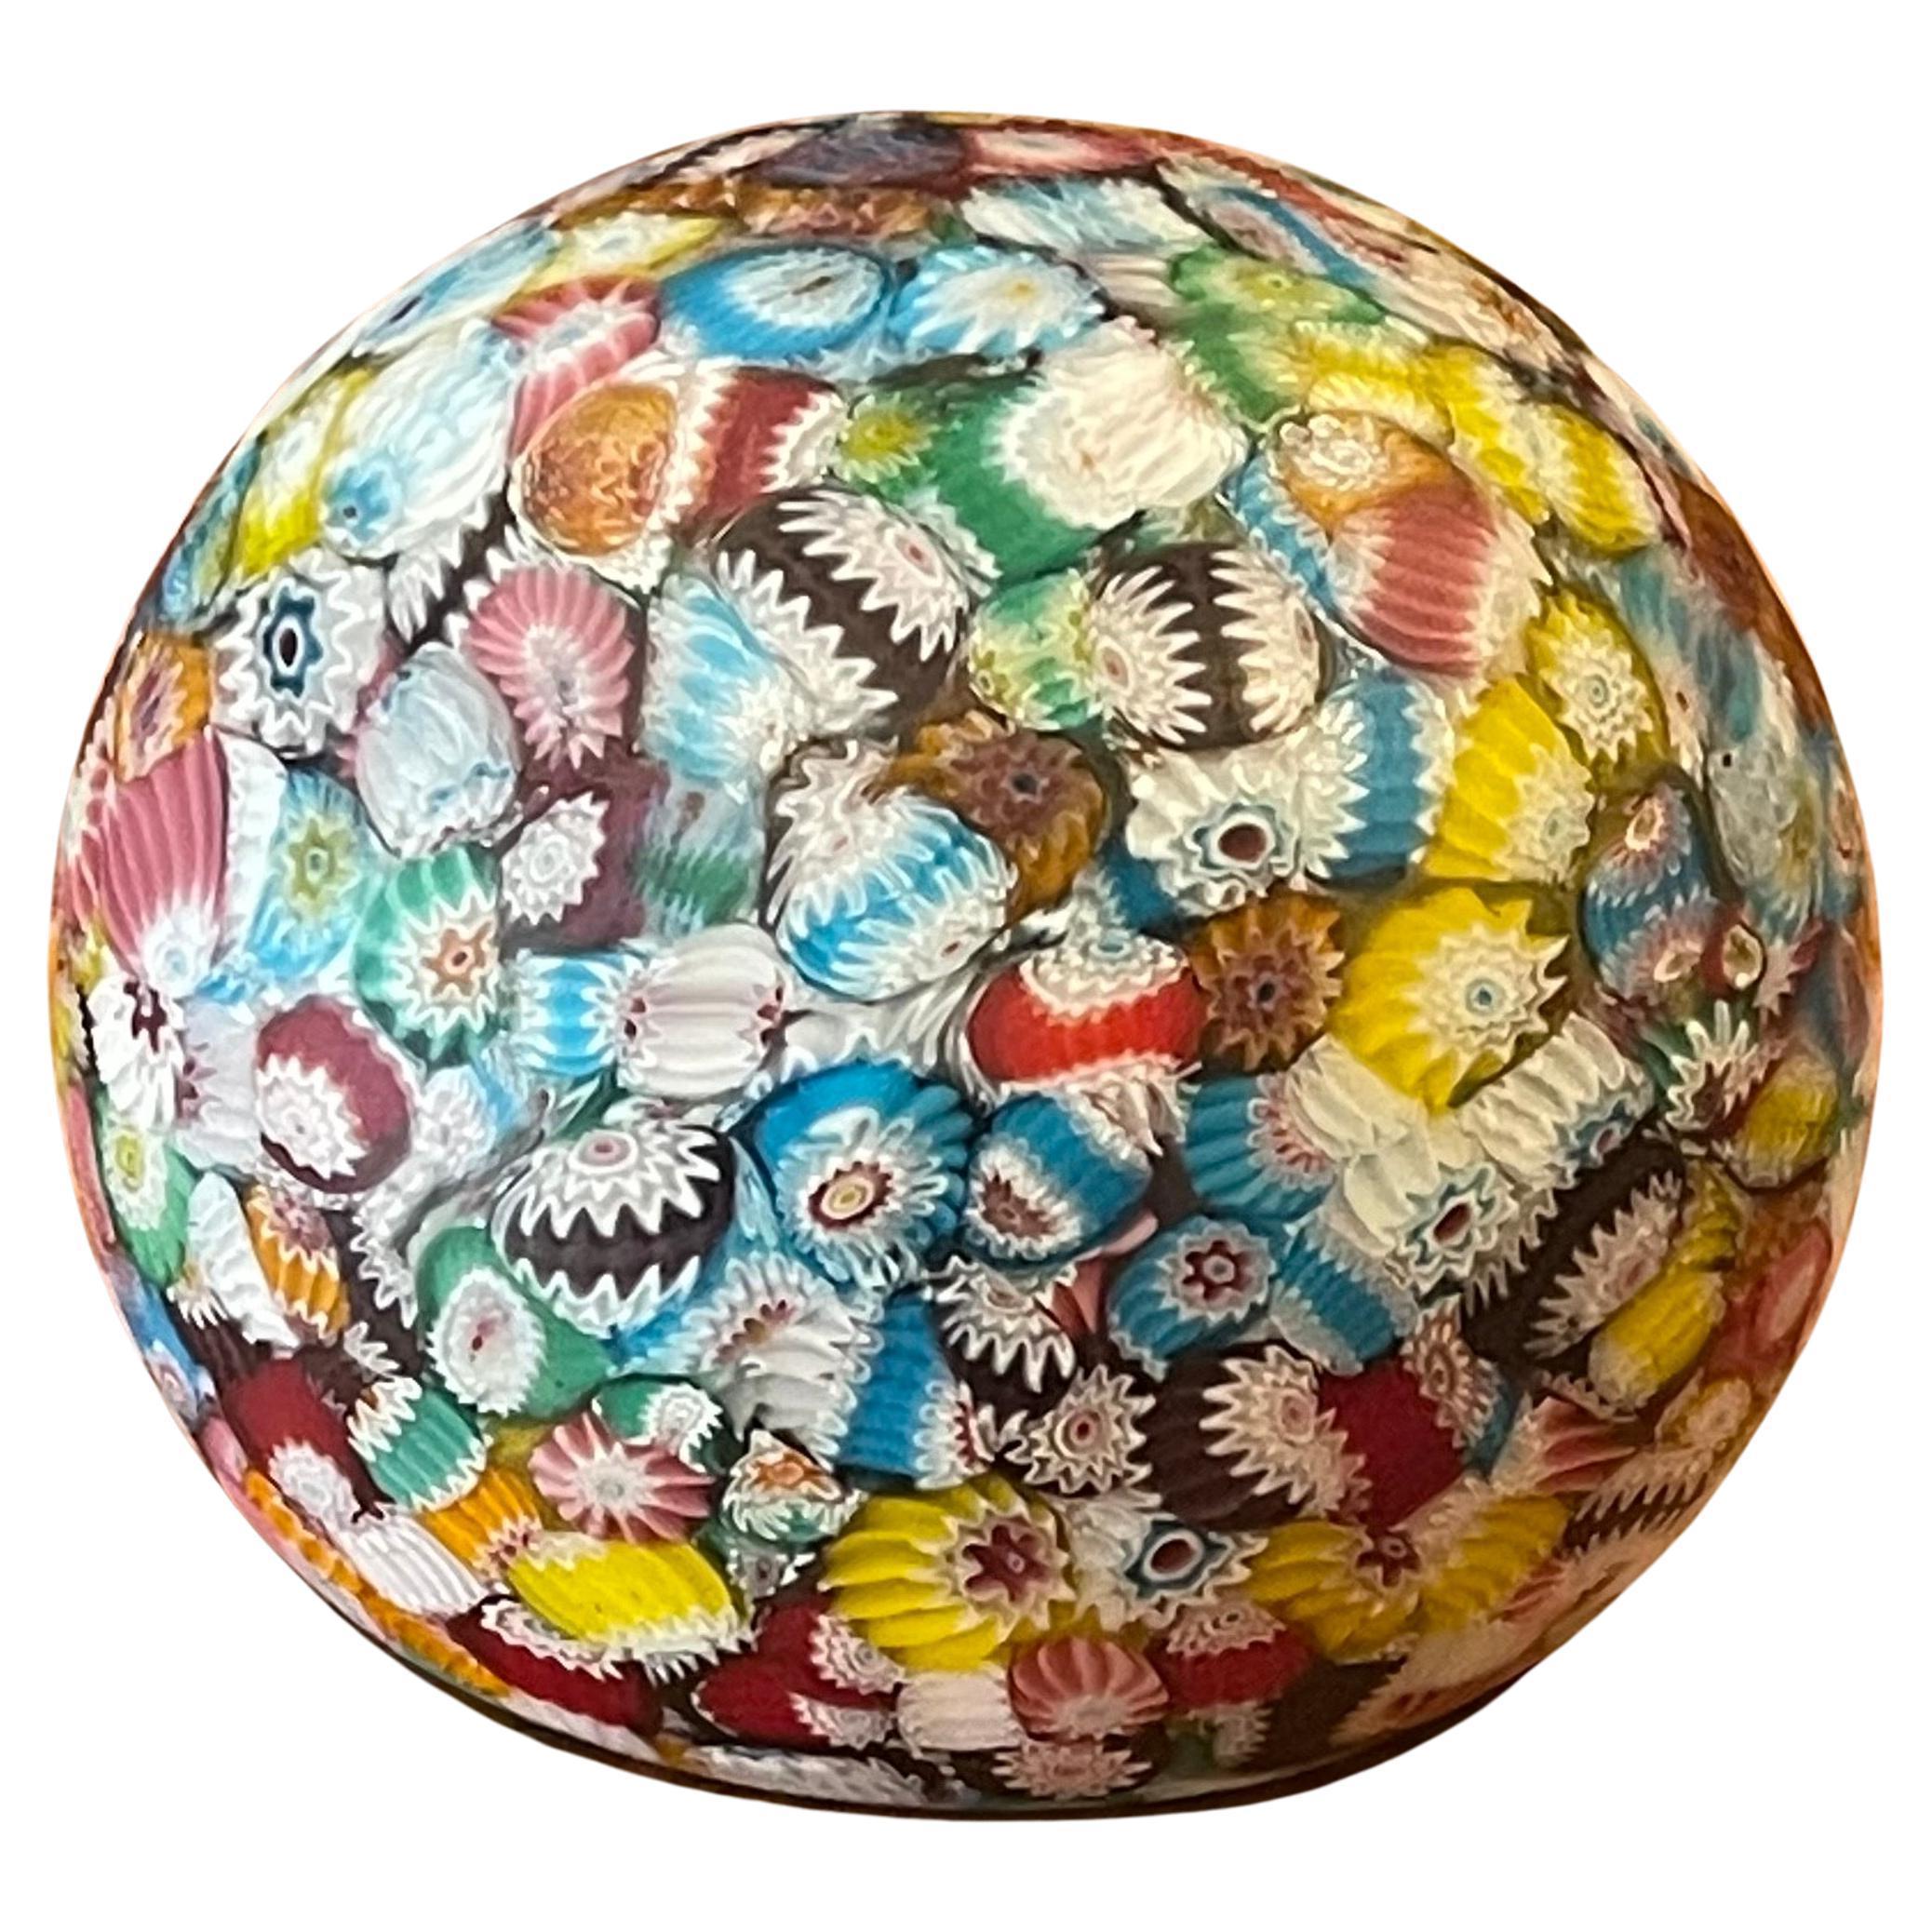 Colorful Art Glass Paperweight by Millefiori of Italy